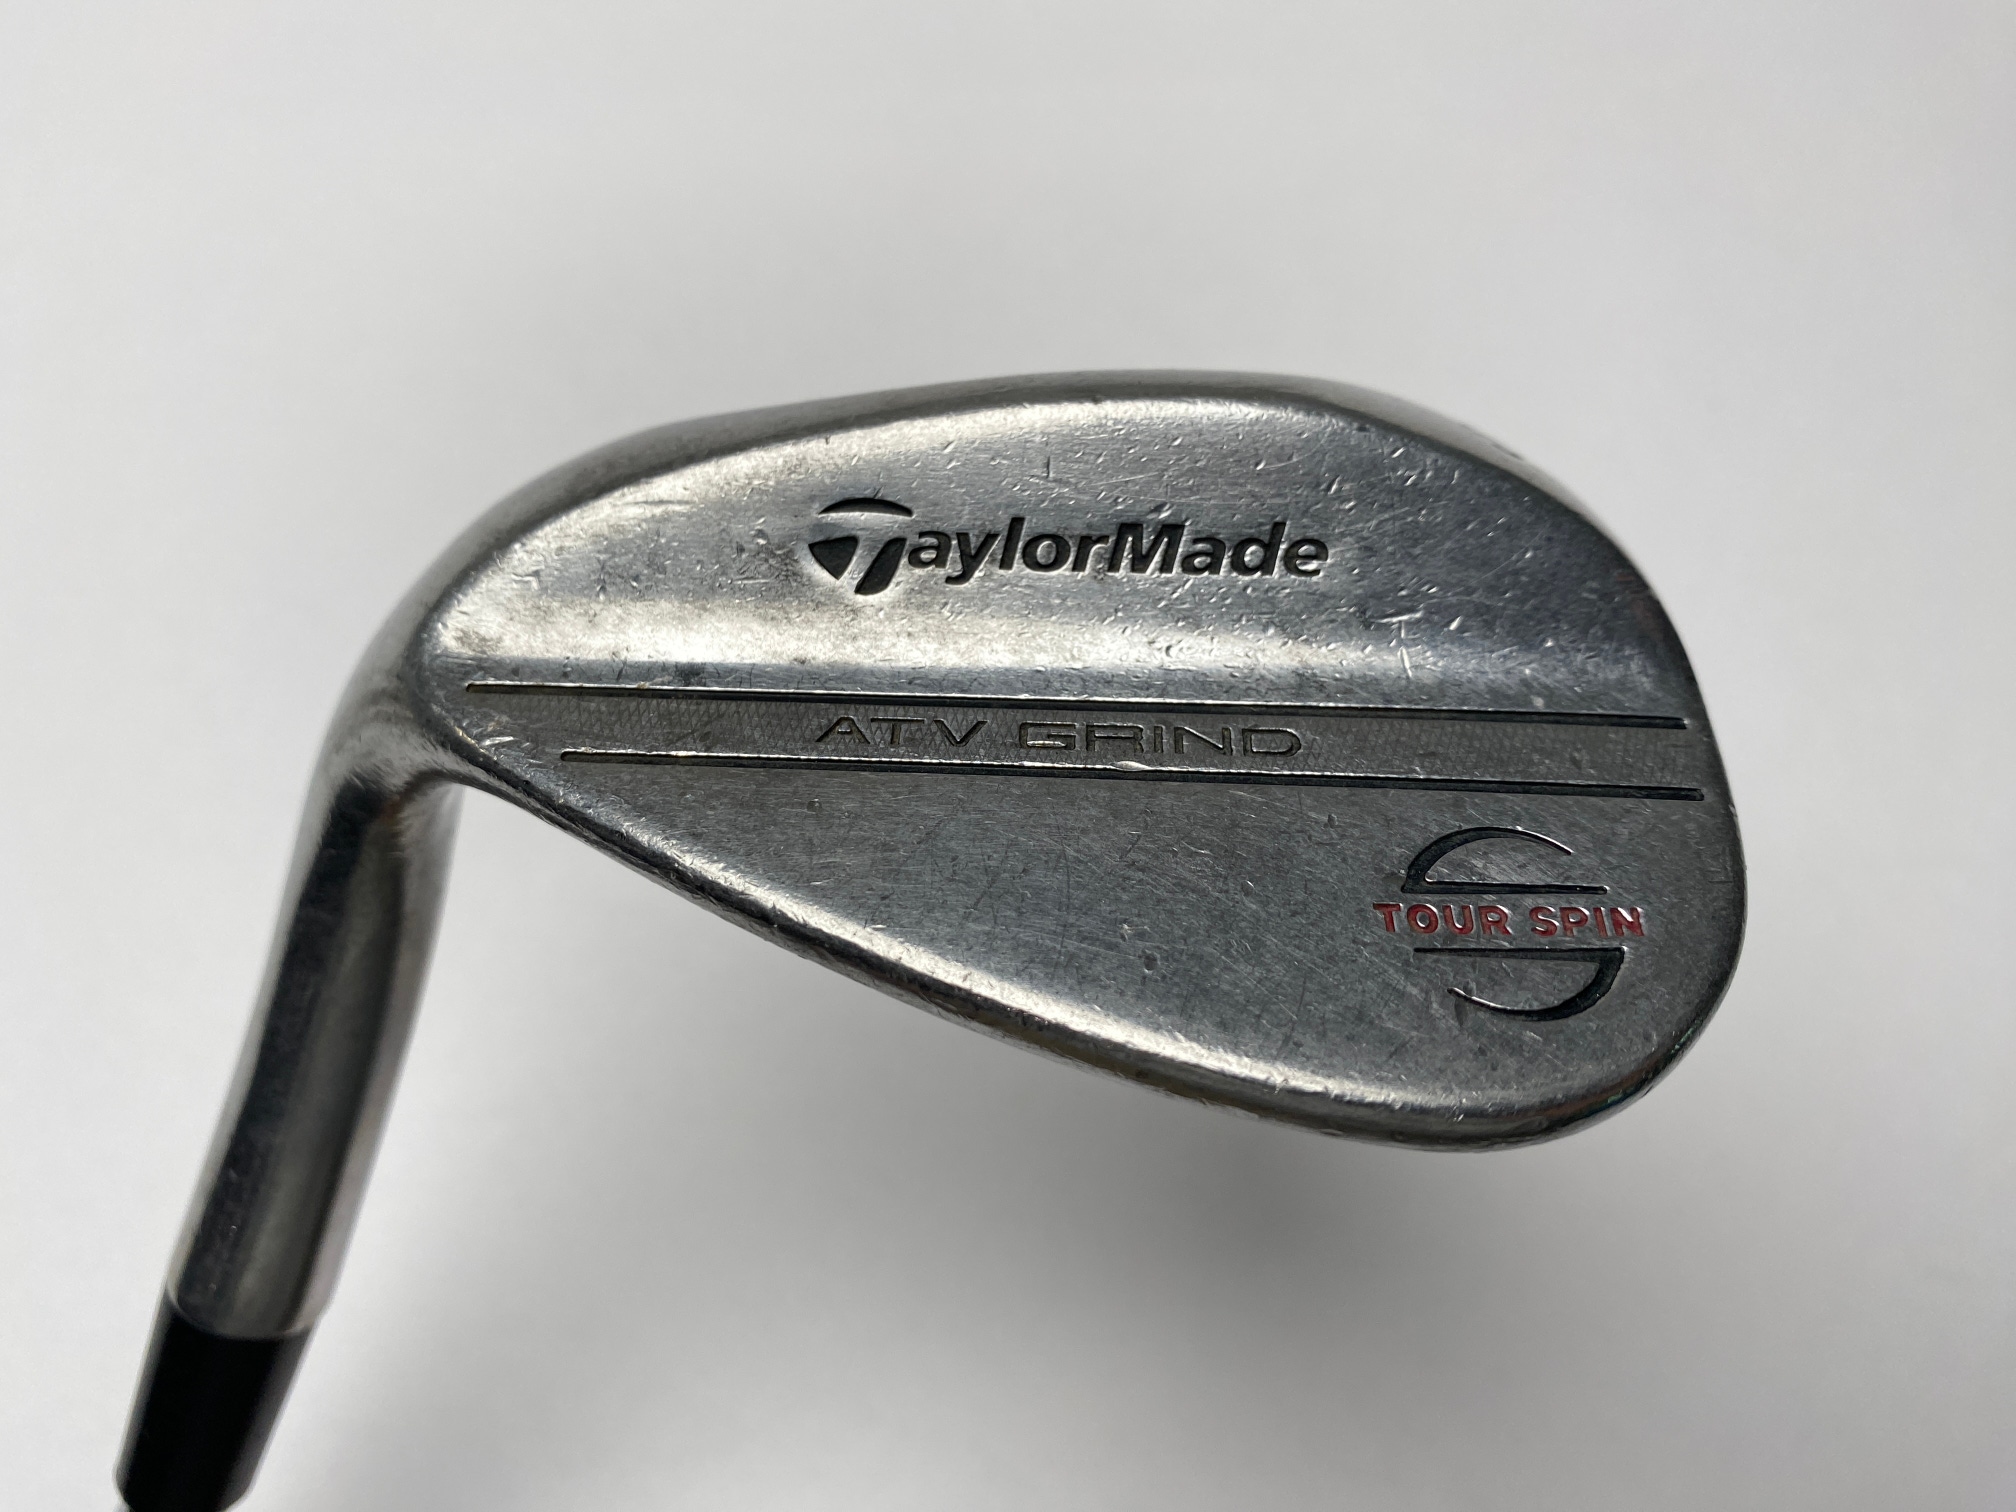 Taylormade ATV Grind Super Spin Sand Wedge SW 56* KBS Tour 105g Wedge Steel LH